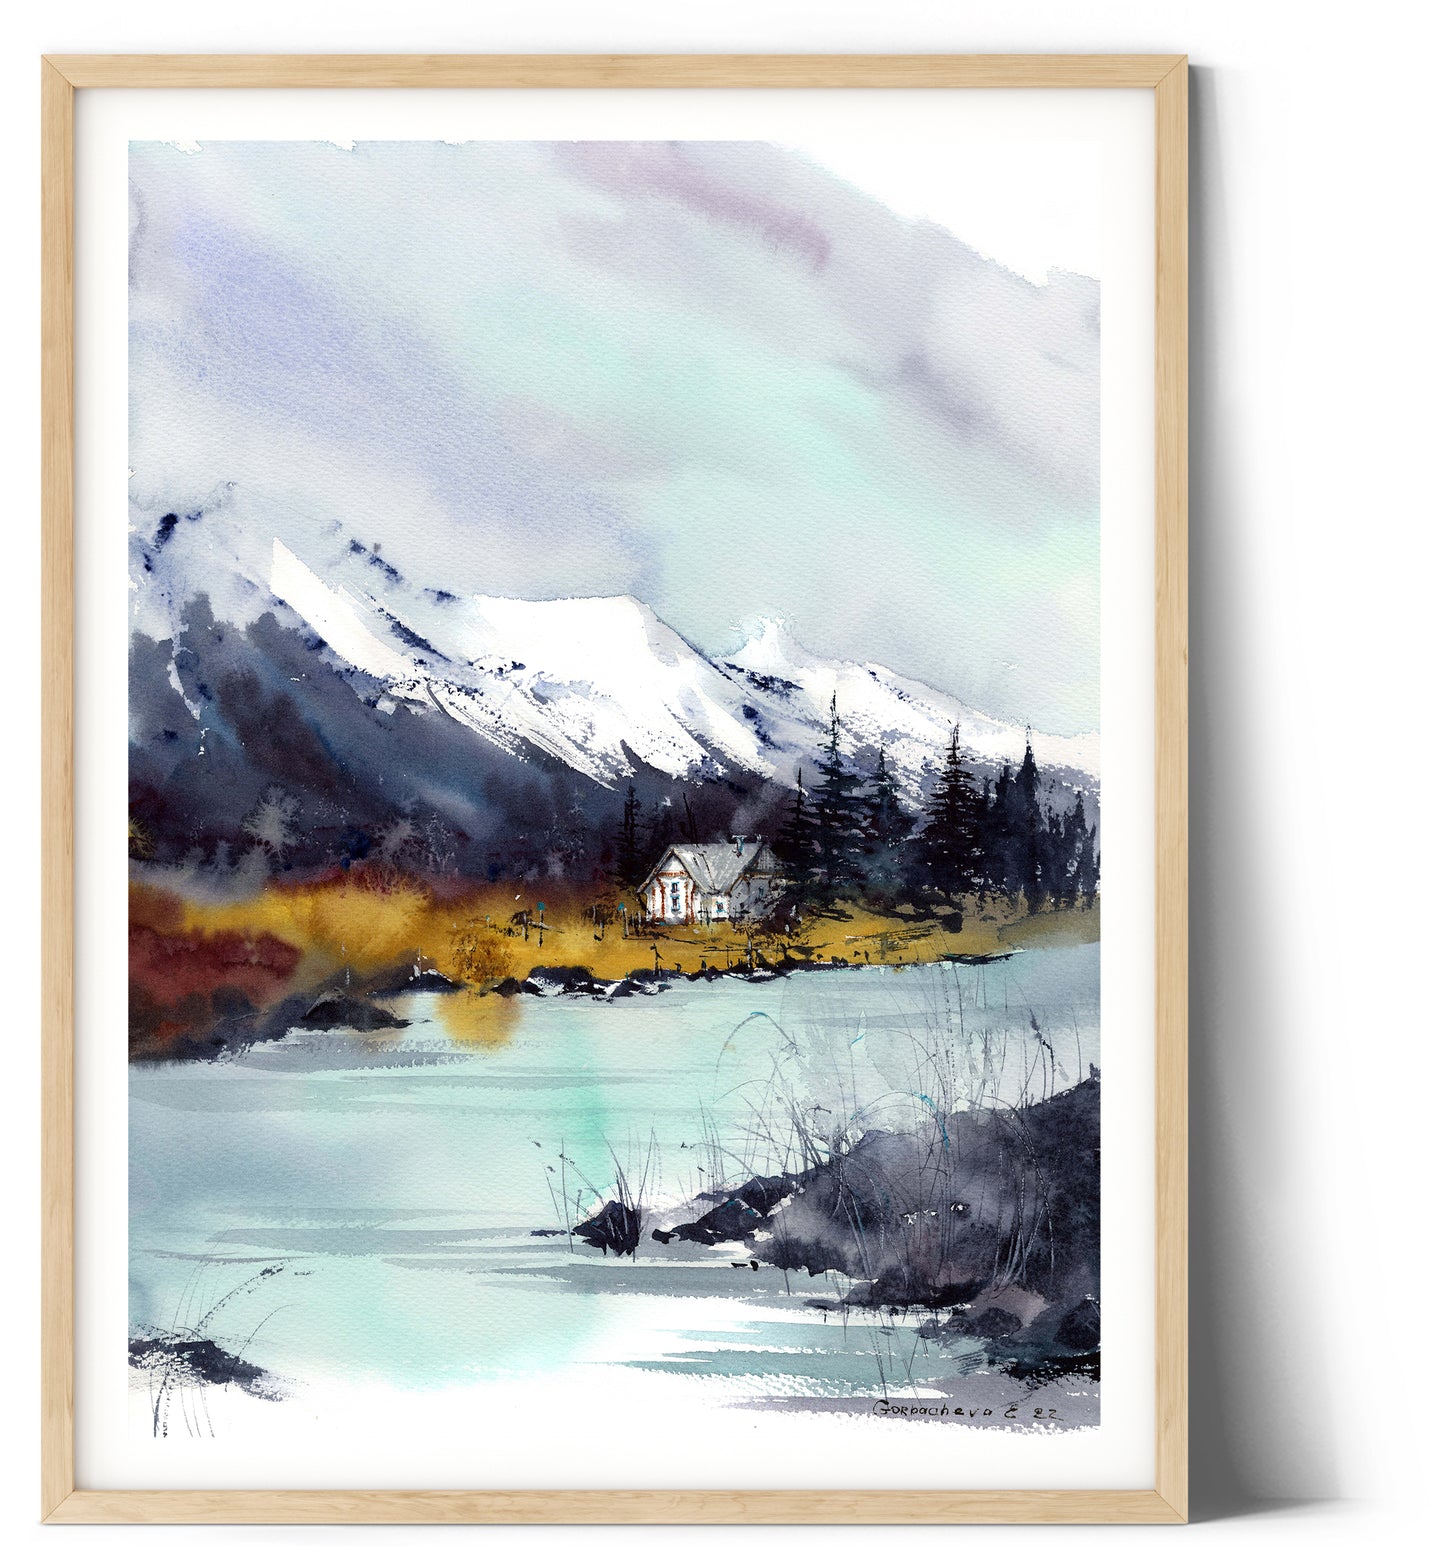 Mountain Lake Set of 2 Piece Fall Nature Wall Decor, Abstract Minimalist Watercolor Painting, Scenery Extra Large Prints